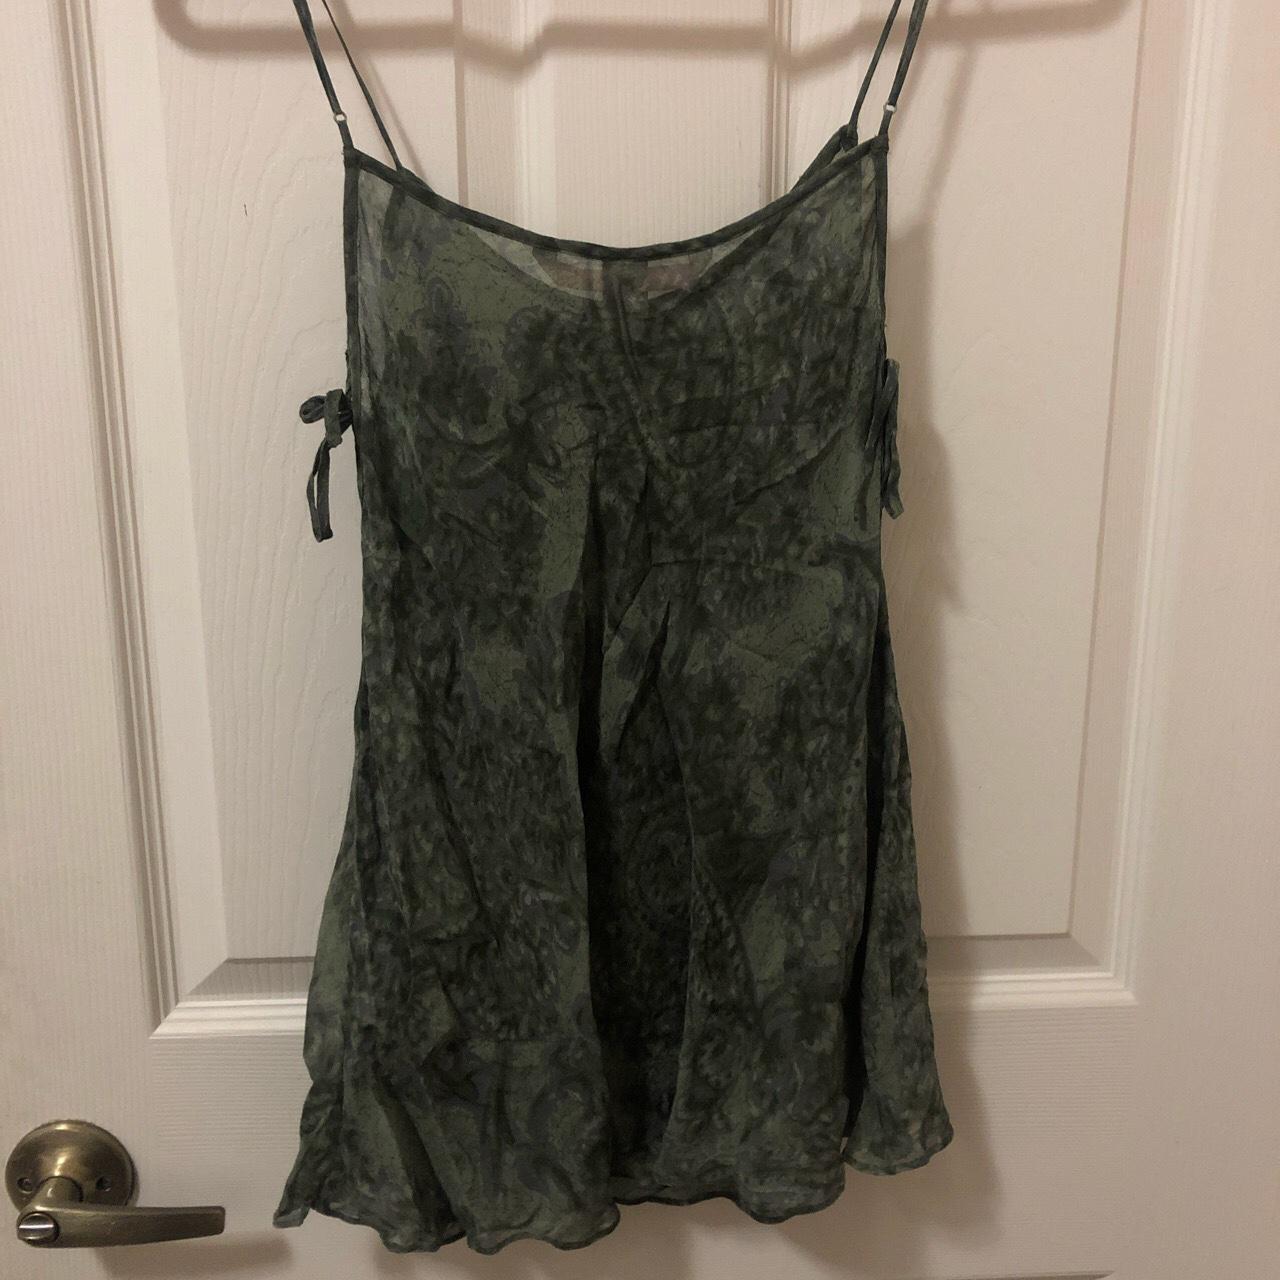 Product Image 2 - ON HOLD

Victoria’s Secret silk green